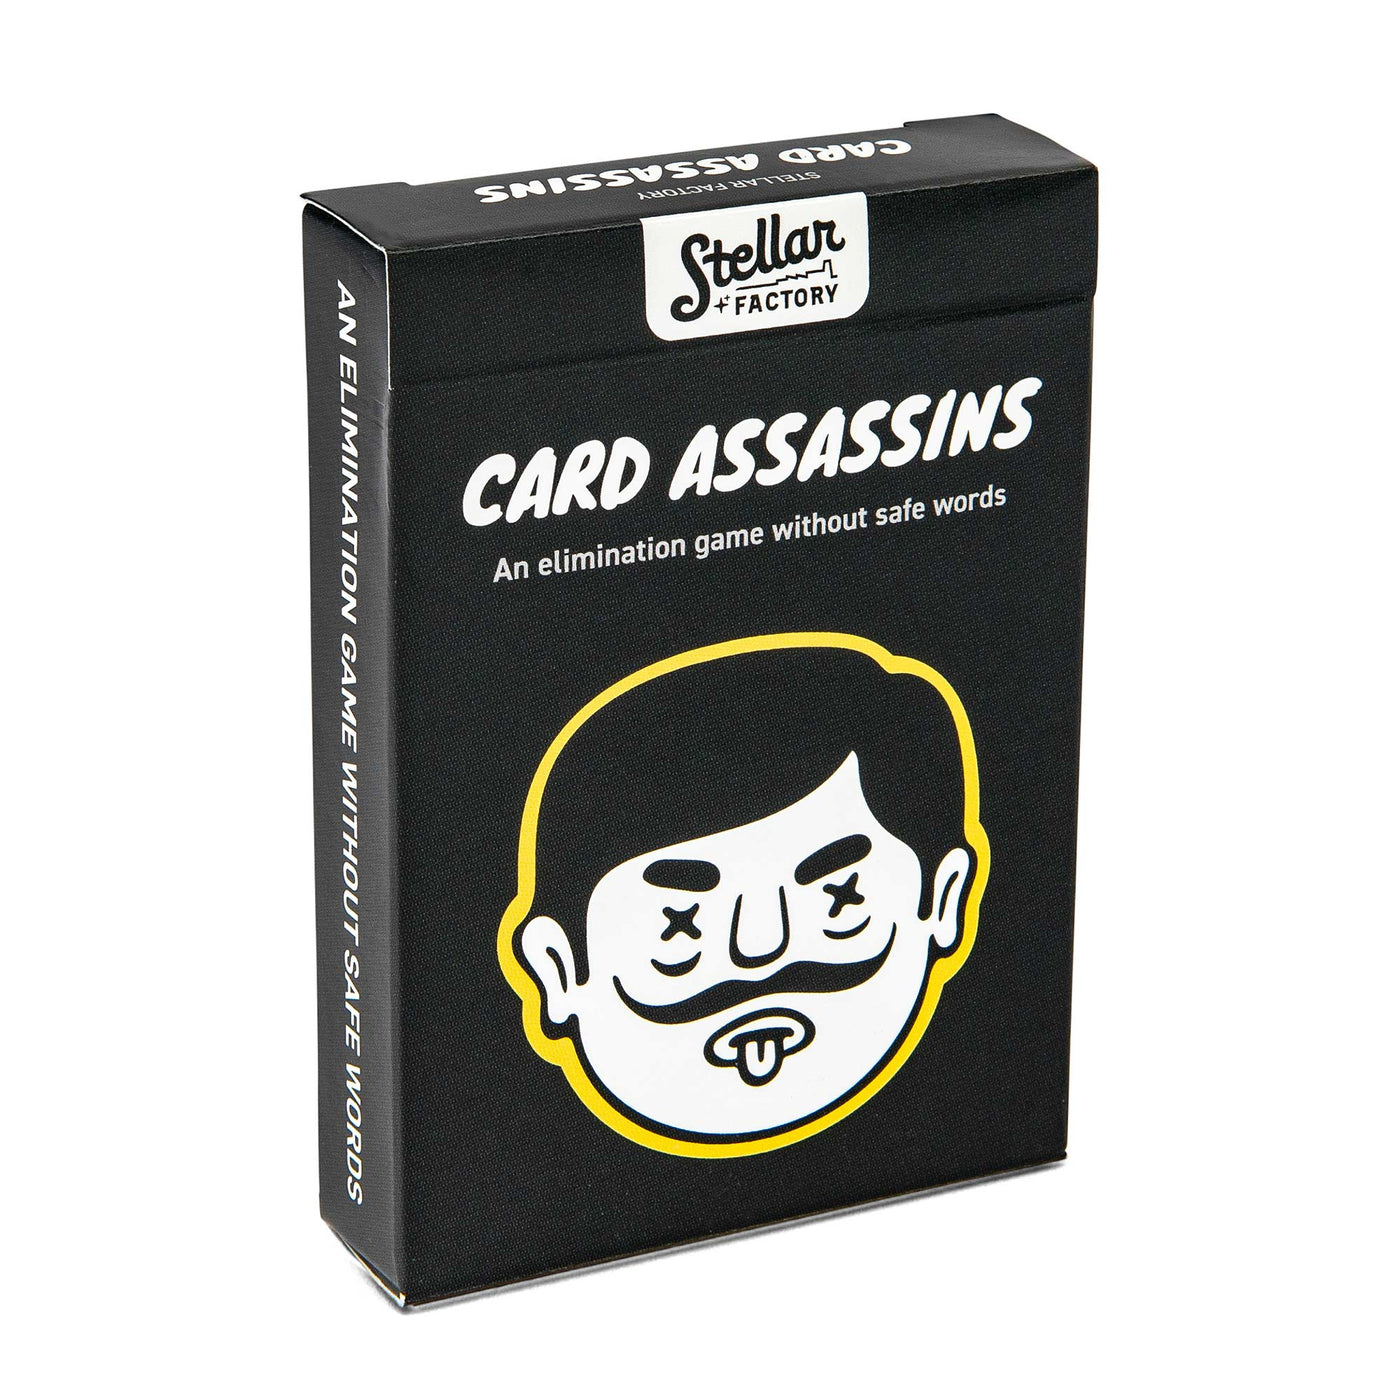 Front of Packaging for Card Assassins